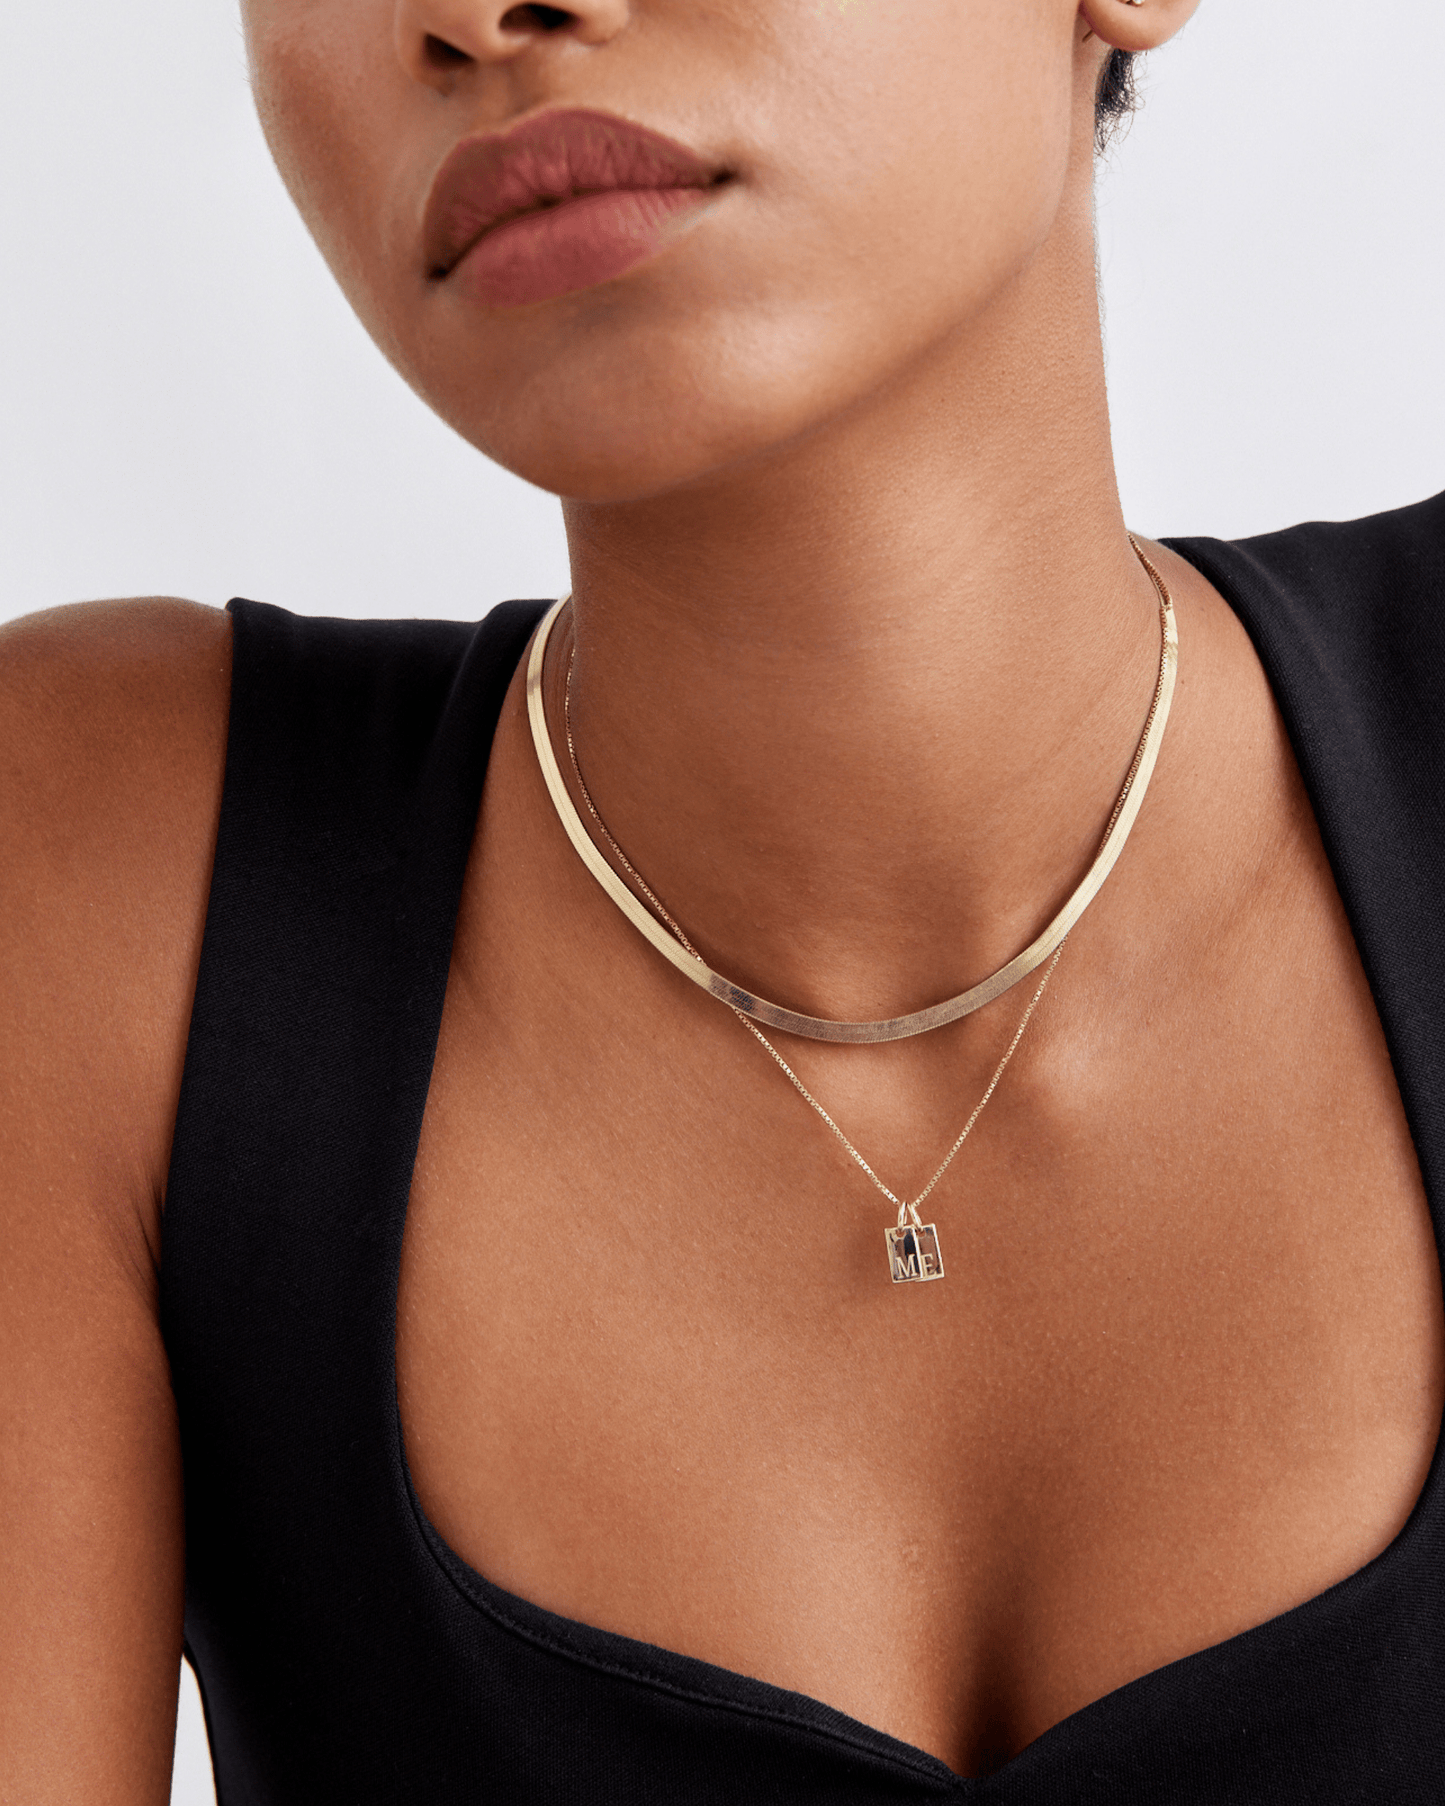 Set of Initial Mini Dogtag & Herringbone Chain Necklaces - 18K Gold Vermeil Necklaces magal-dev 